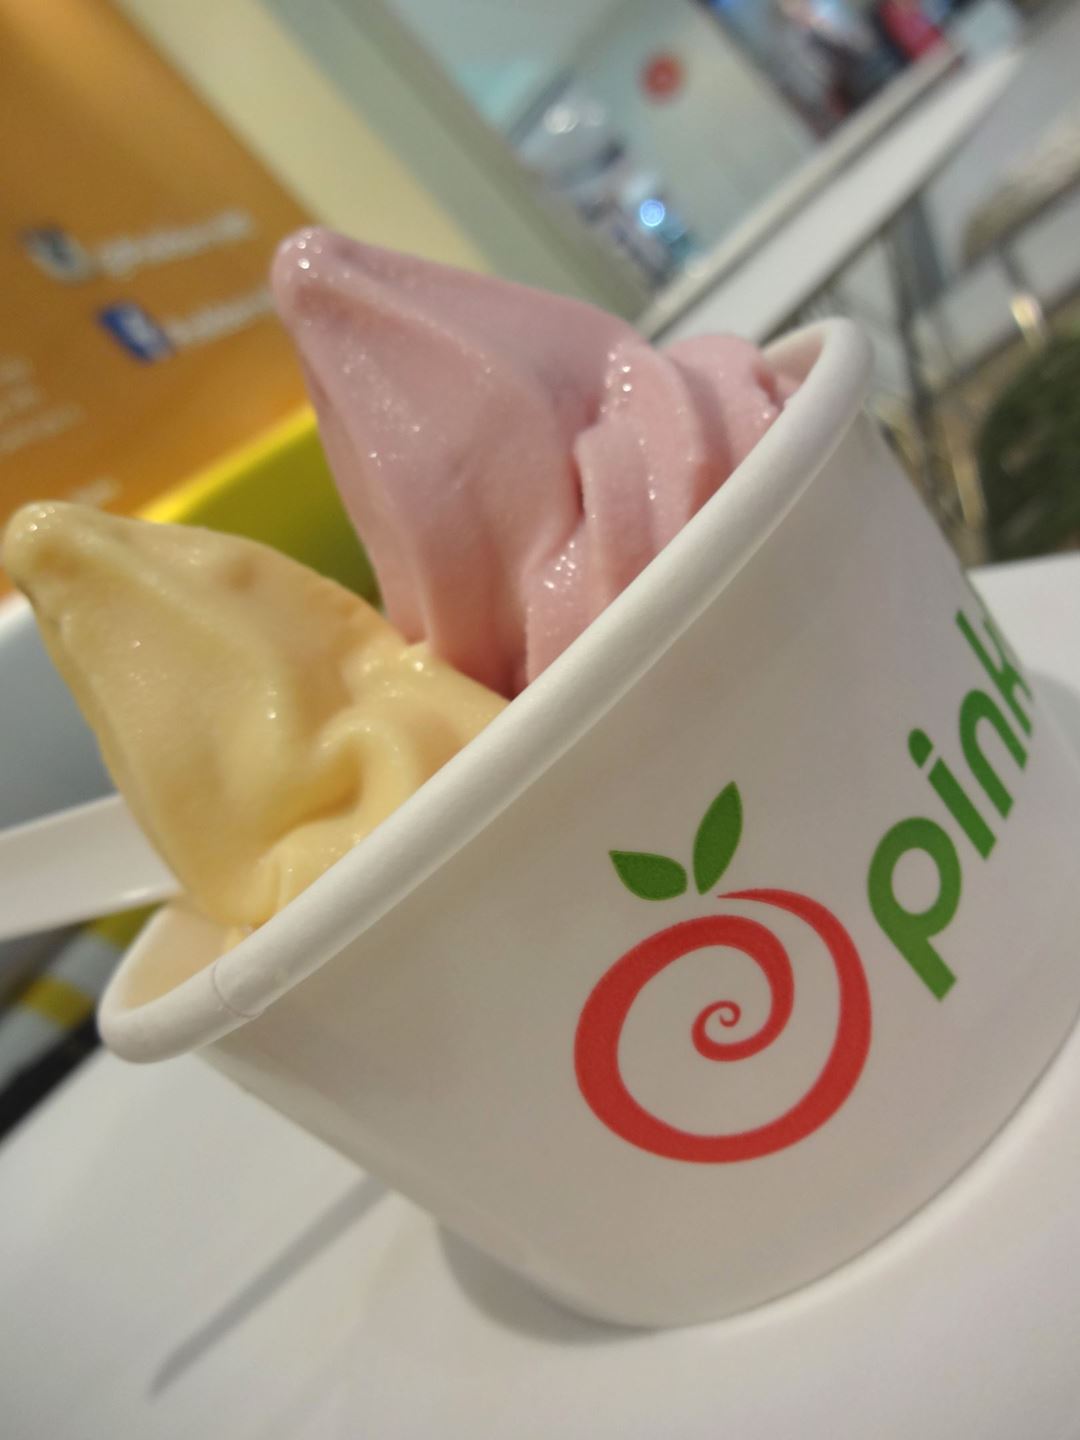 A cold yummy dessert from Pinkberry